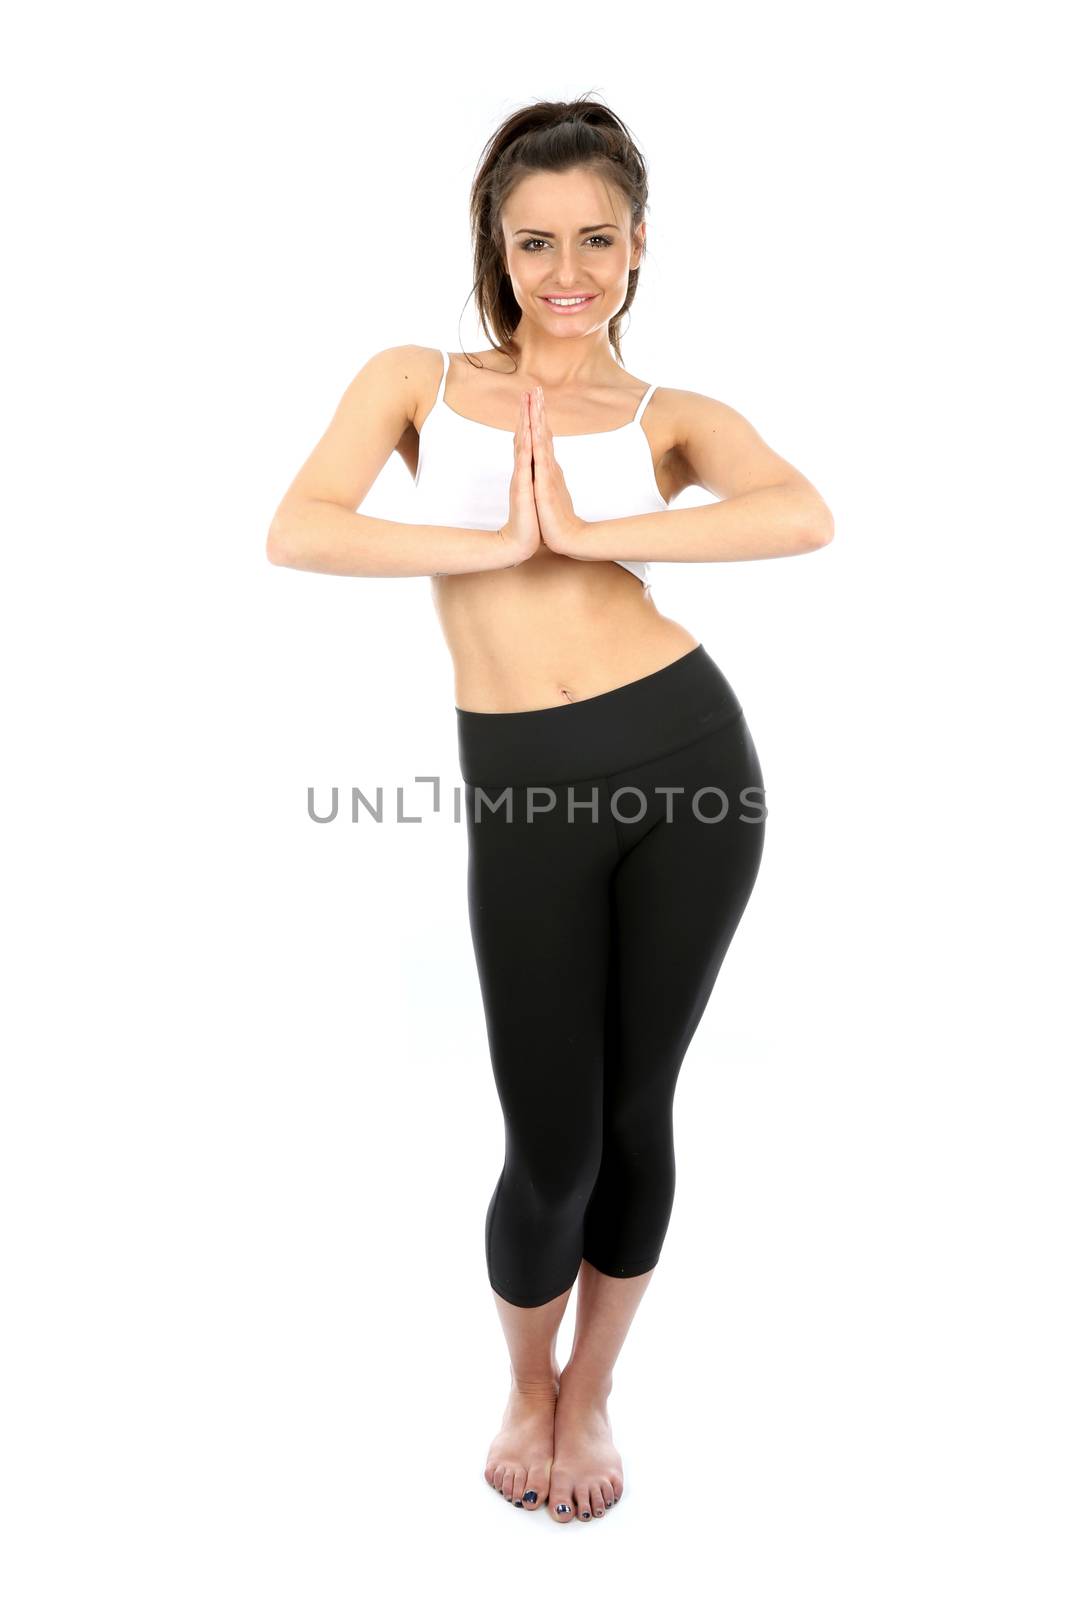 Model Released. Woman Exercising by Whiteboxmedia